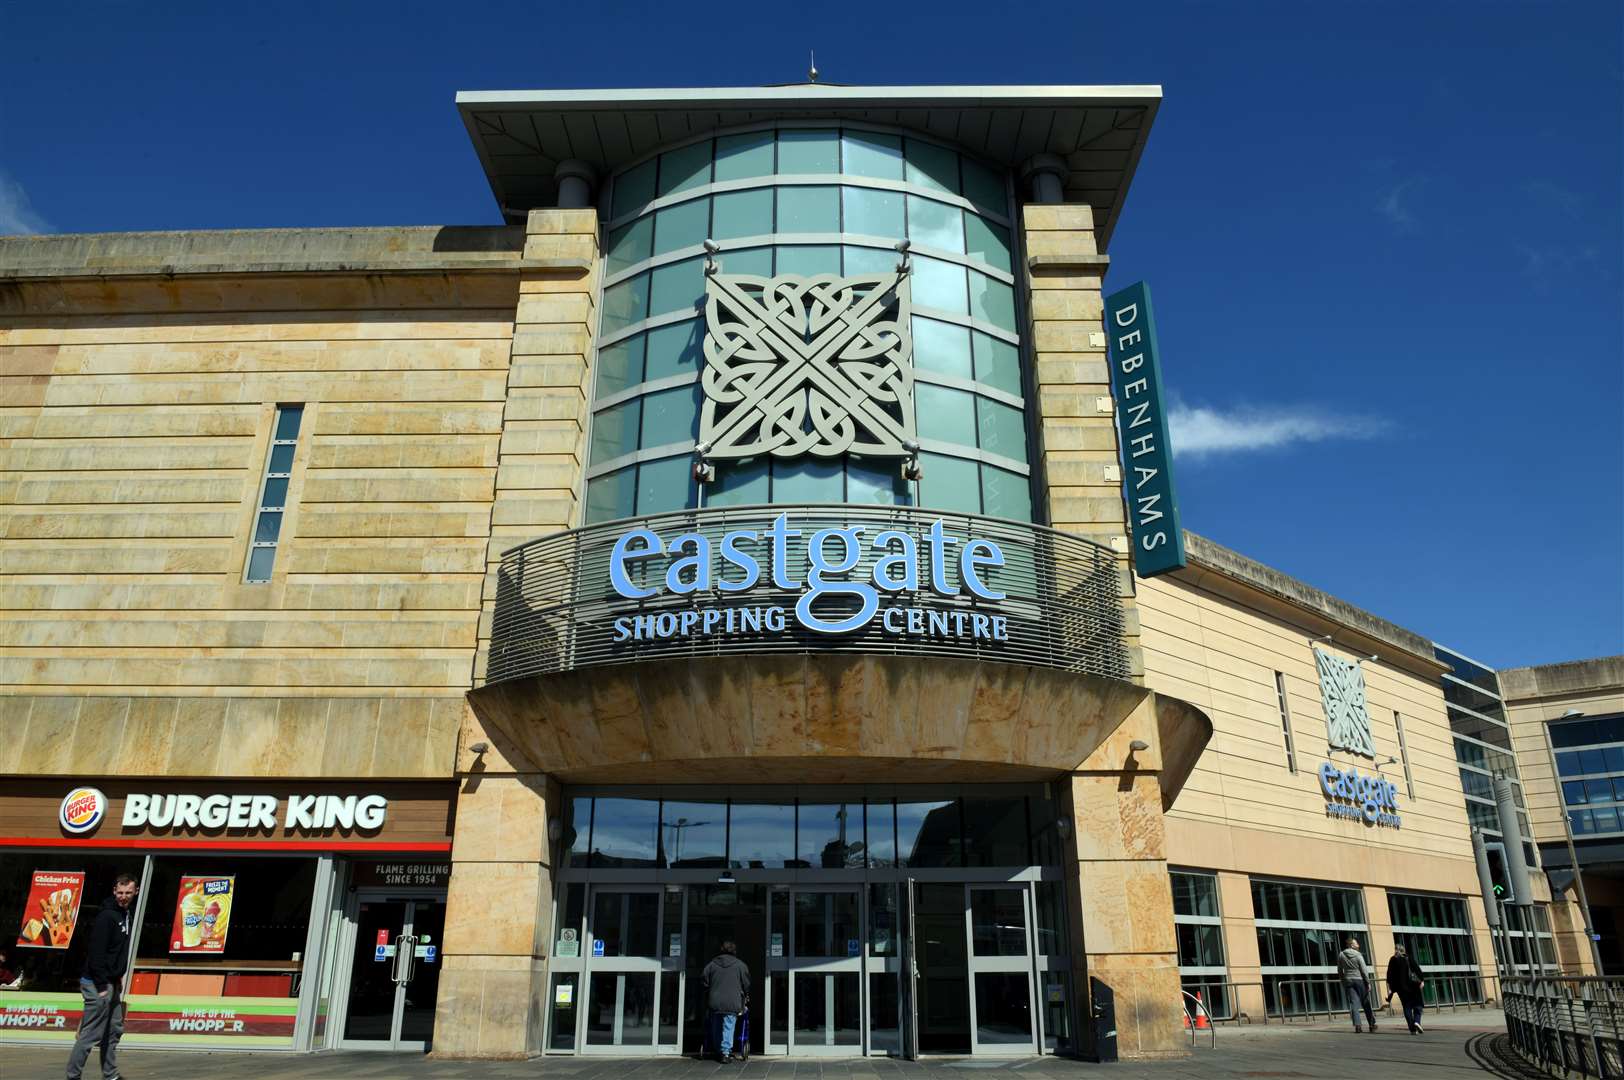 Youngsters are invited to have sporting fun at the Eastgate Shopping Centre.